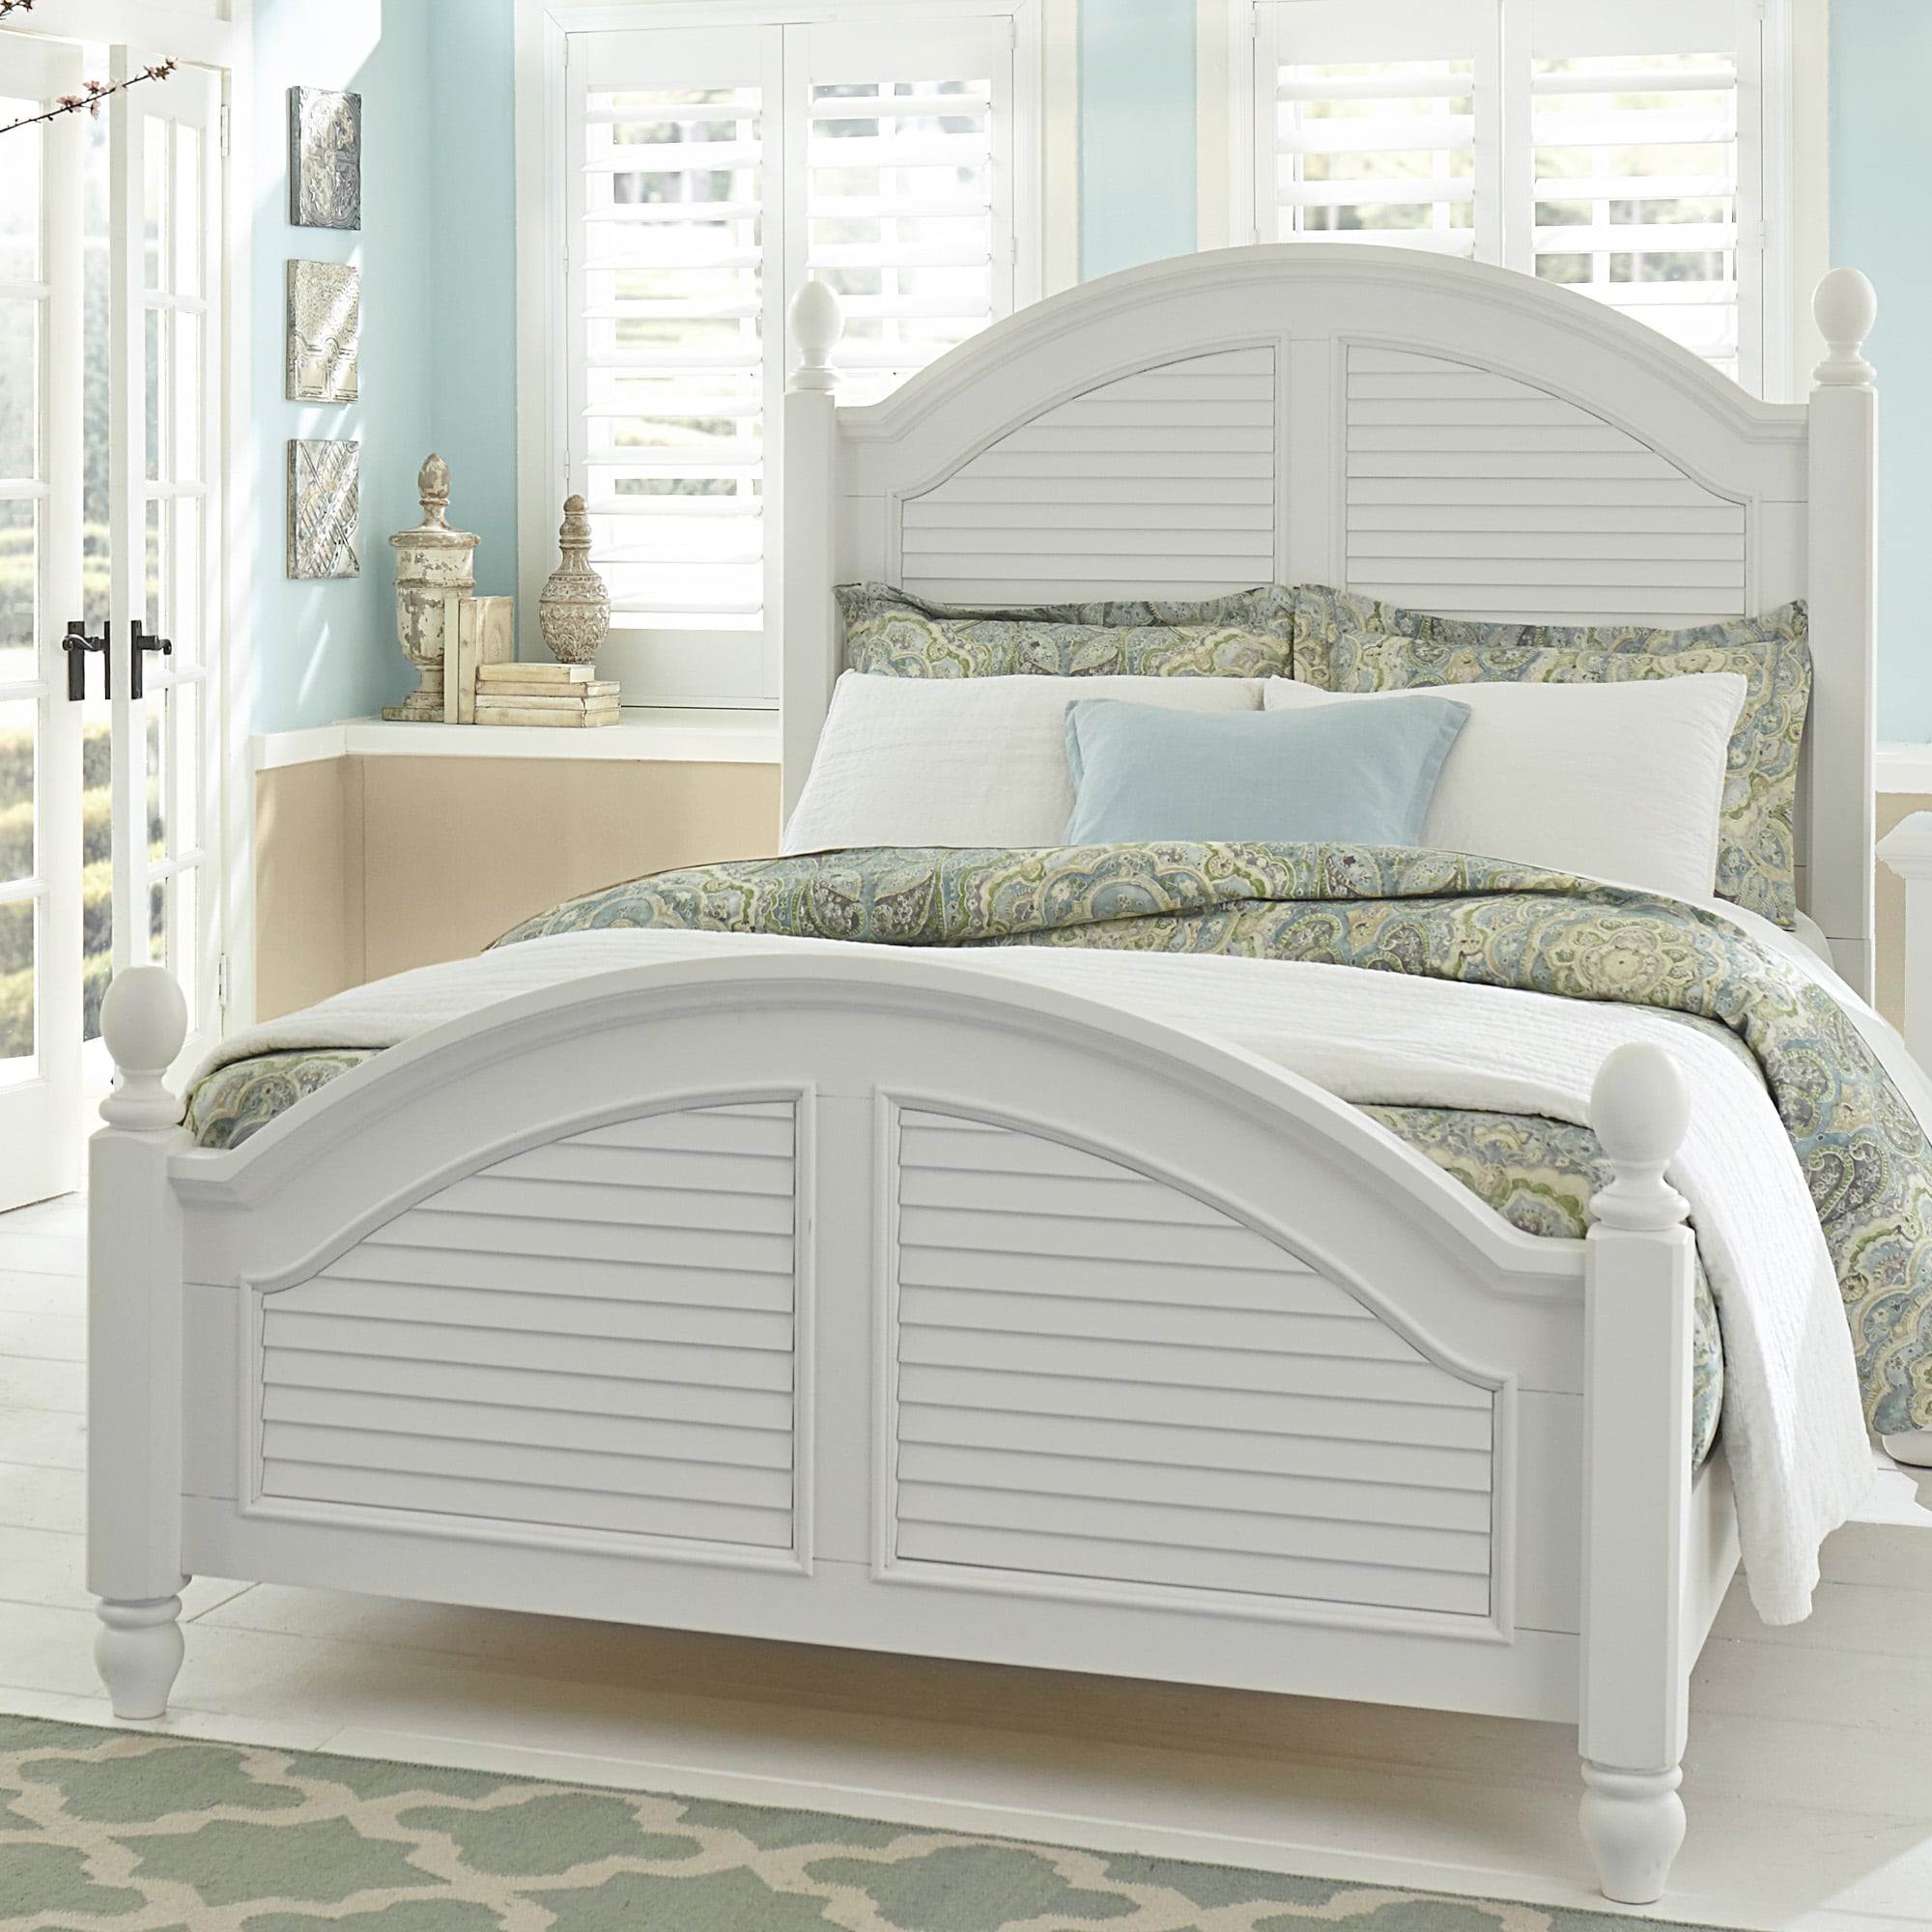 https://ak1.ostkcdn.com/images/products/is/images/direct/74675940b458ced7b8c0d99e506969ce0621d568/Summer-House-I-Oyster-White-Queen-Poster-Bed.jpg